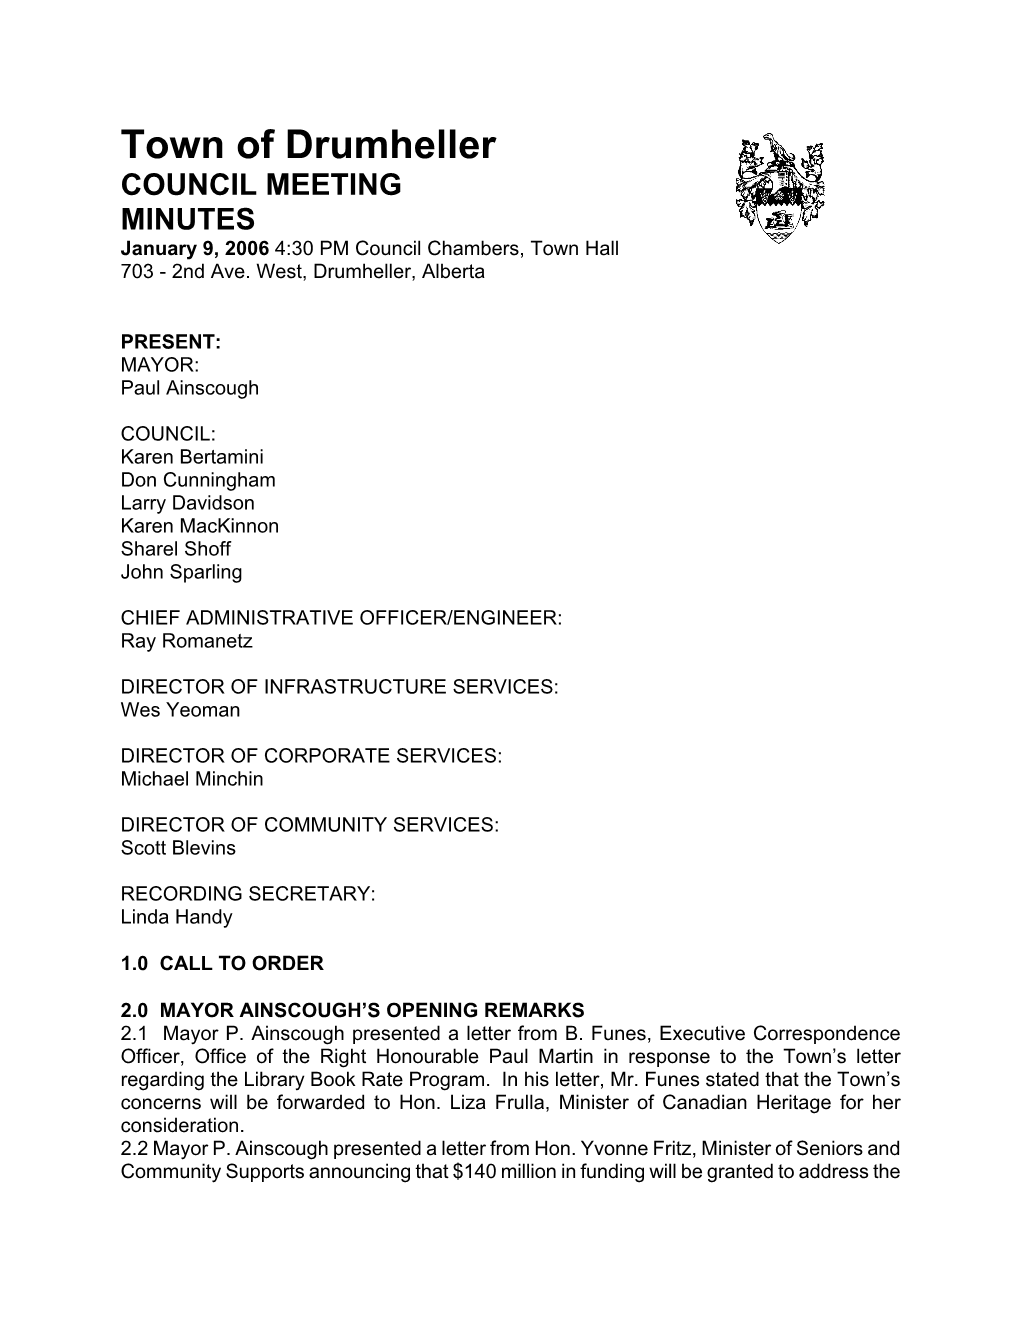 Town of Drumheller COUNCIL MEETING MINUTES January 9, 2006 4:30 PM Council Chambers, Town Hall 703 - 2Nd Ave